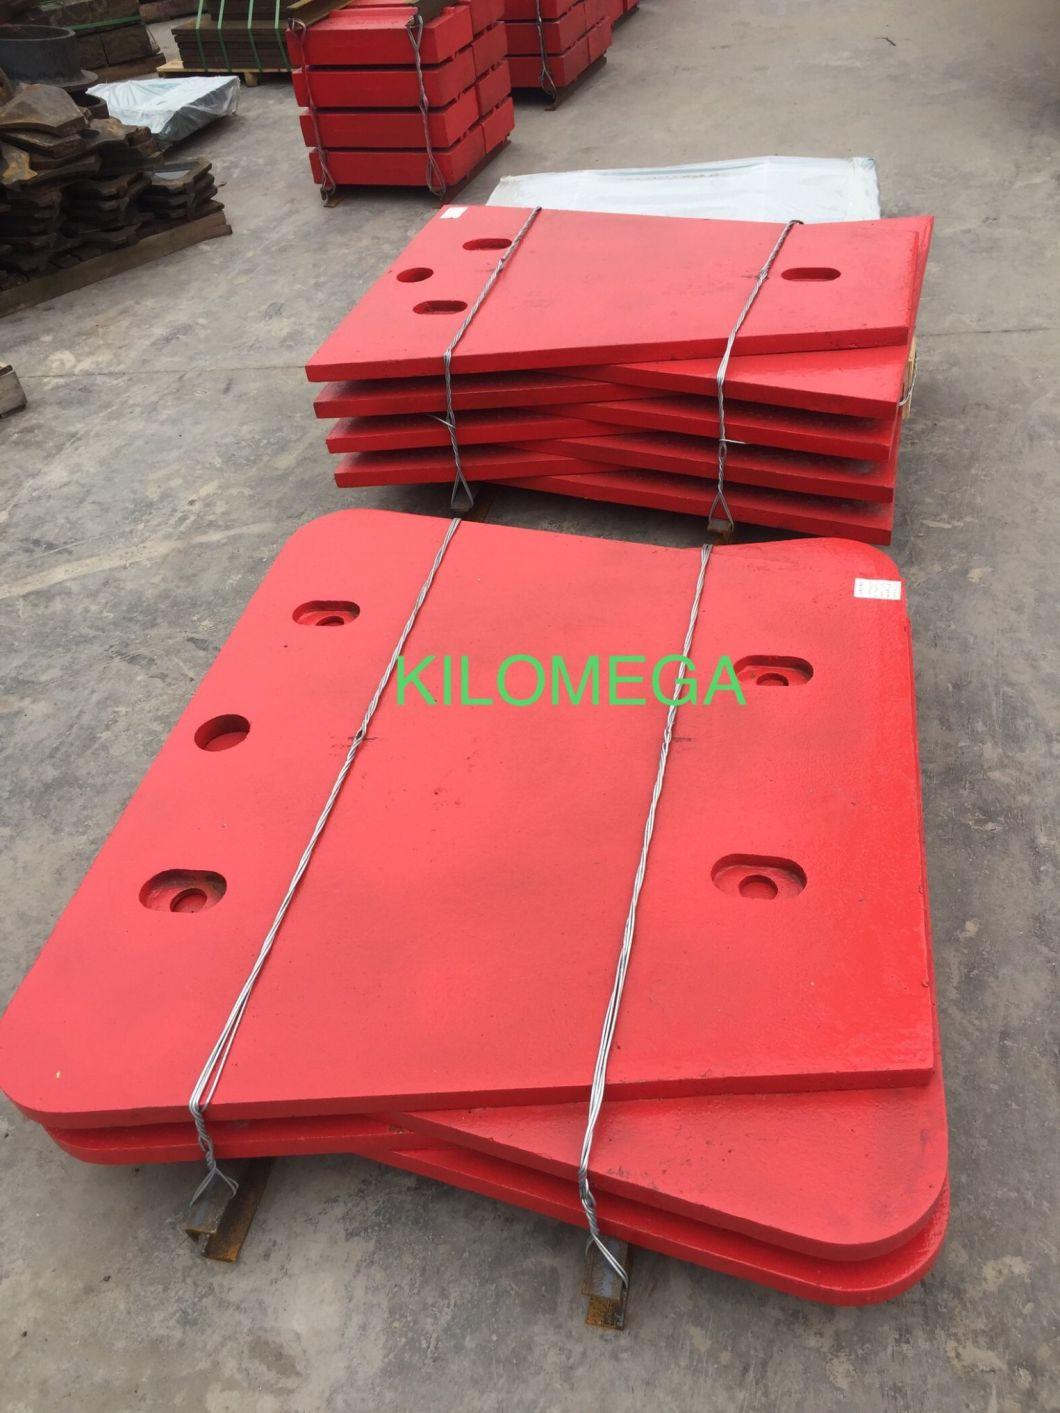 Jaw Crusher Toggle Plate for Exporting